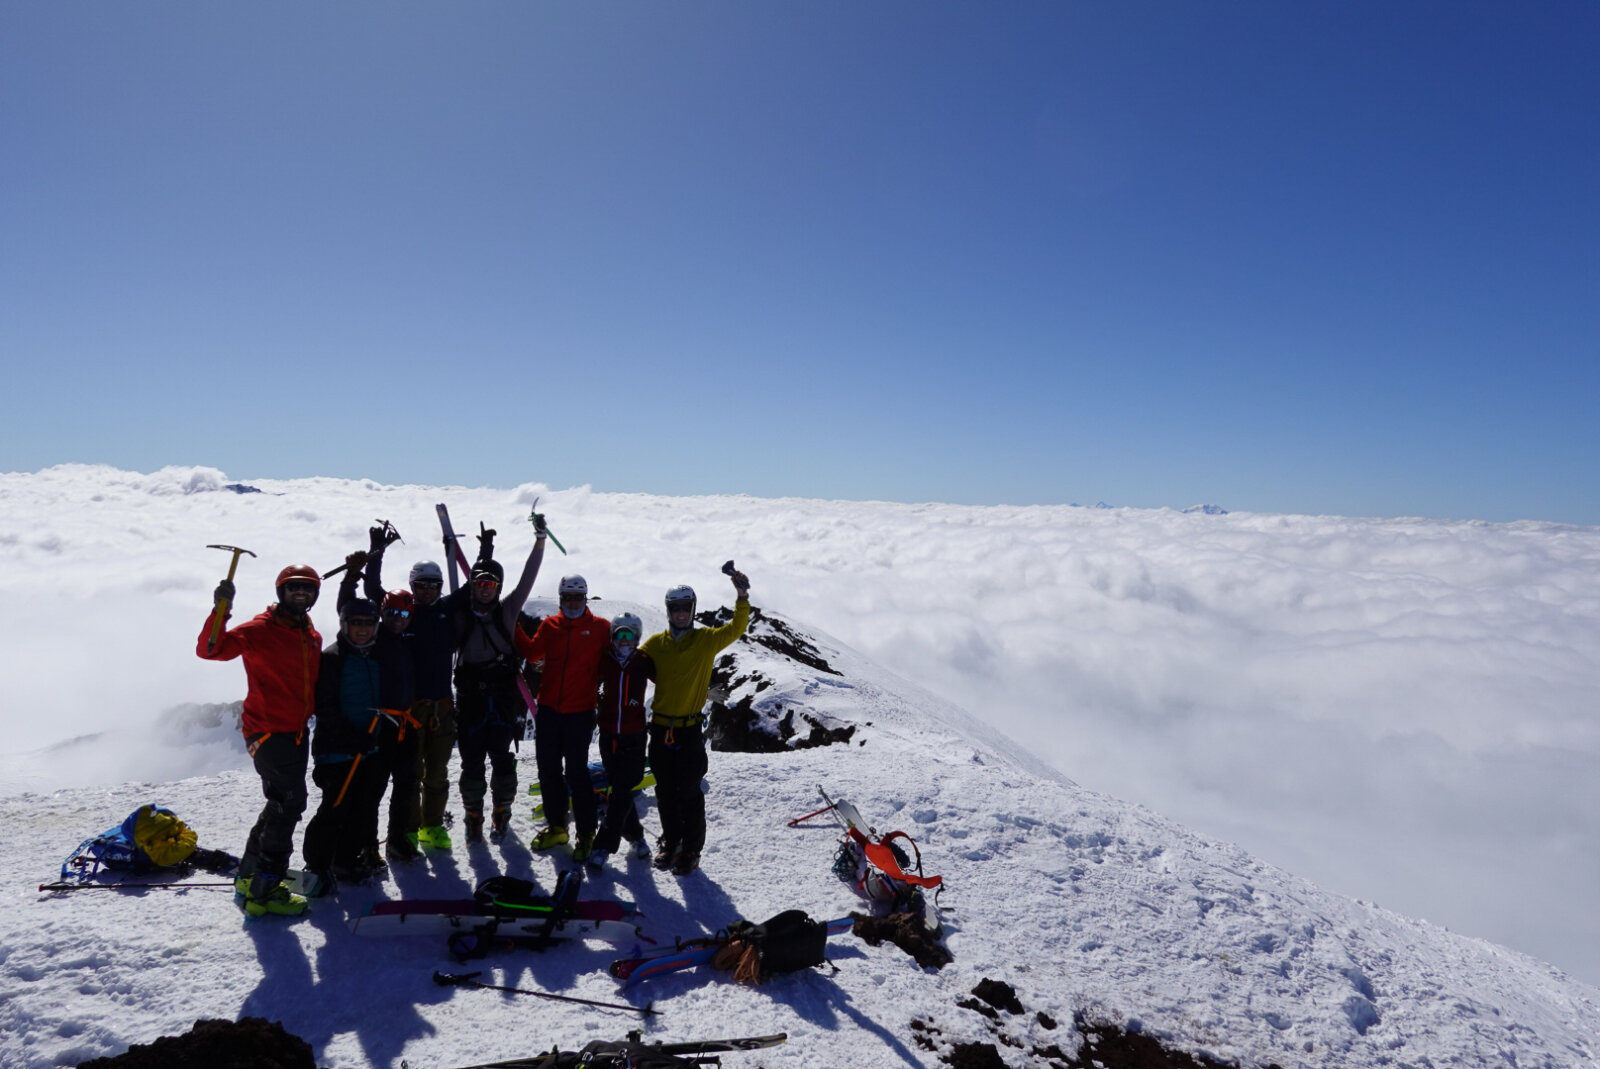 Group of ski mountaineers on the slope of a 6,000m peak in Chile with Alpenglow Expeditions' professionally guided ski mountaineering trip to Chile.